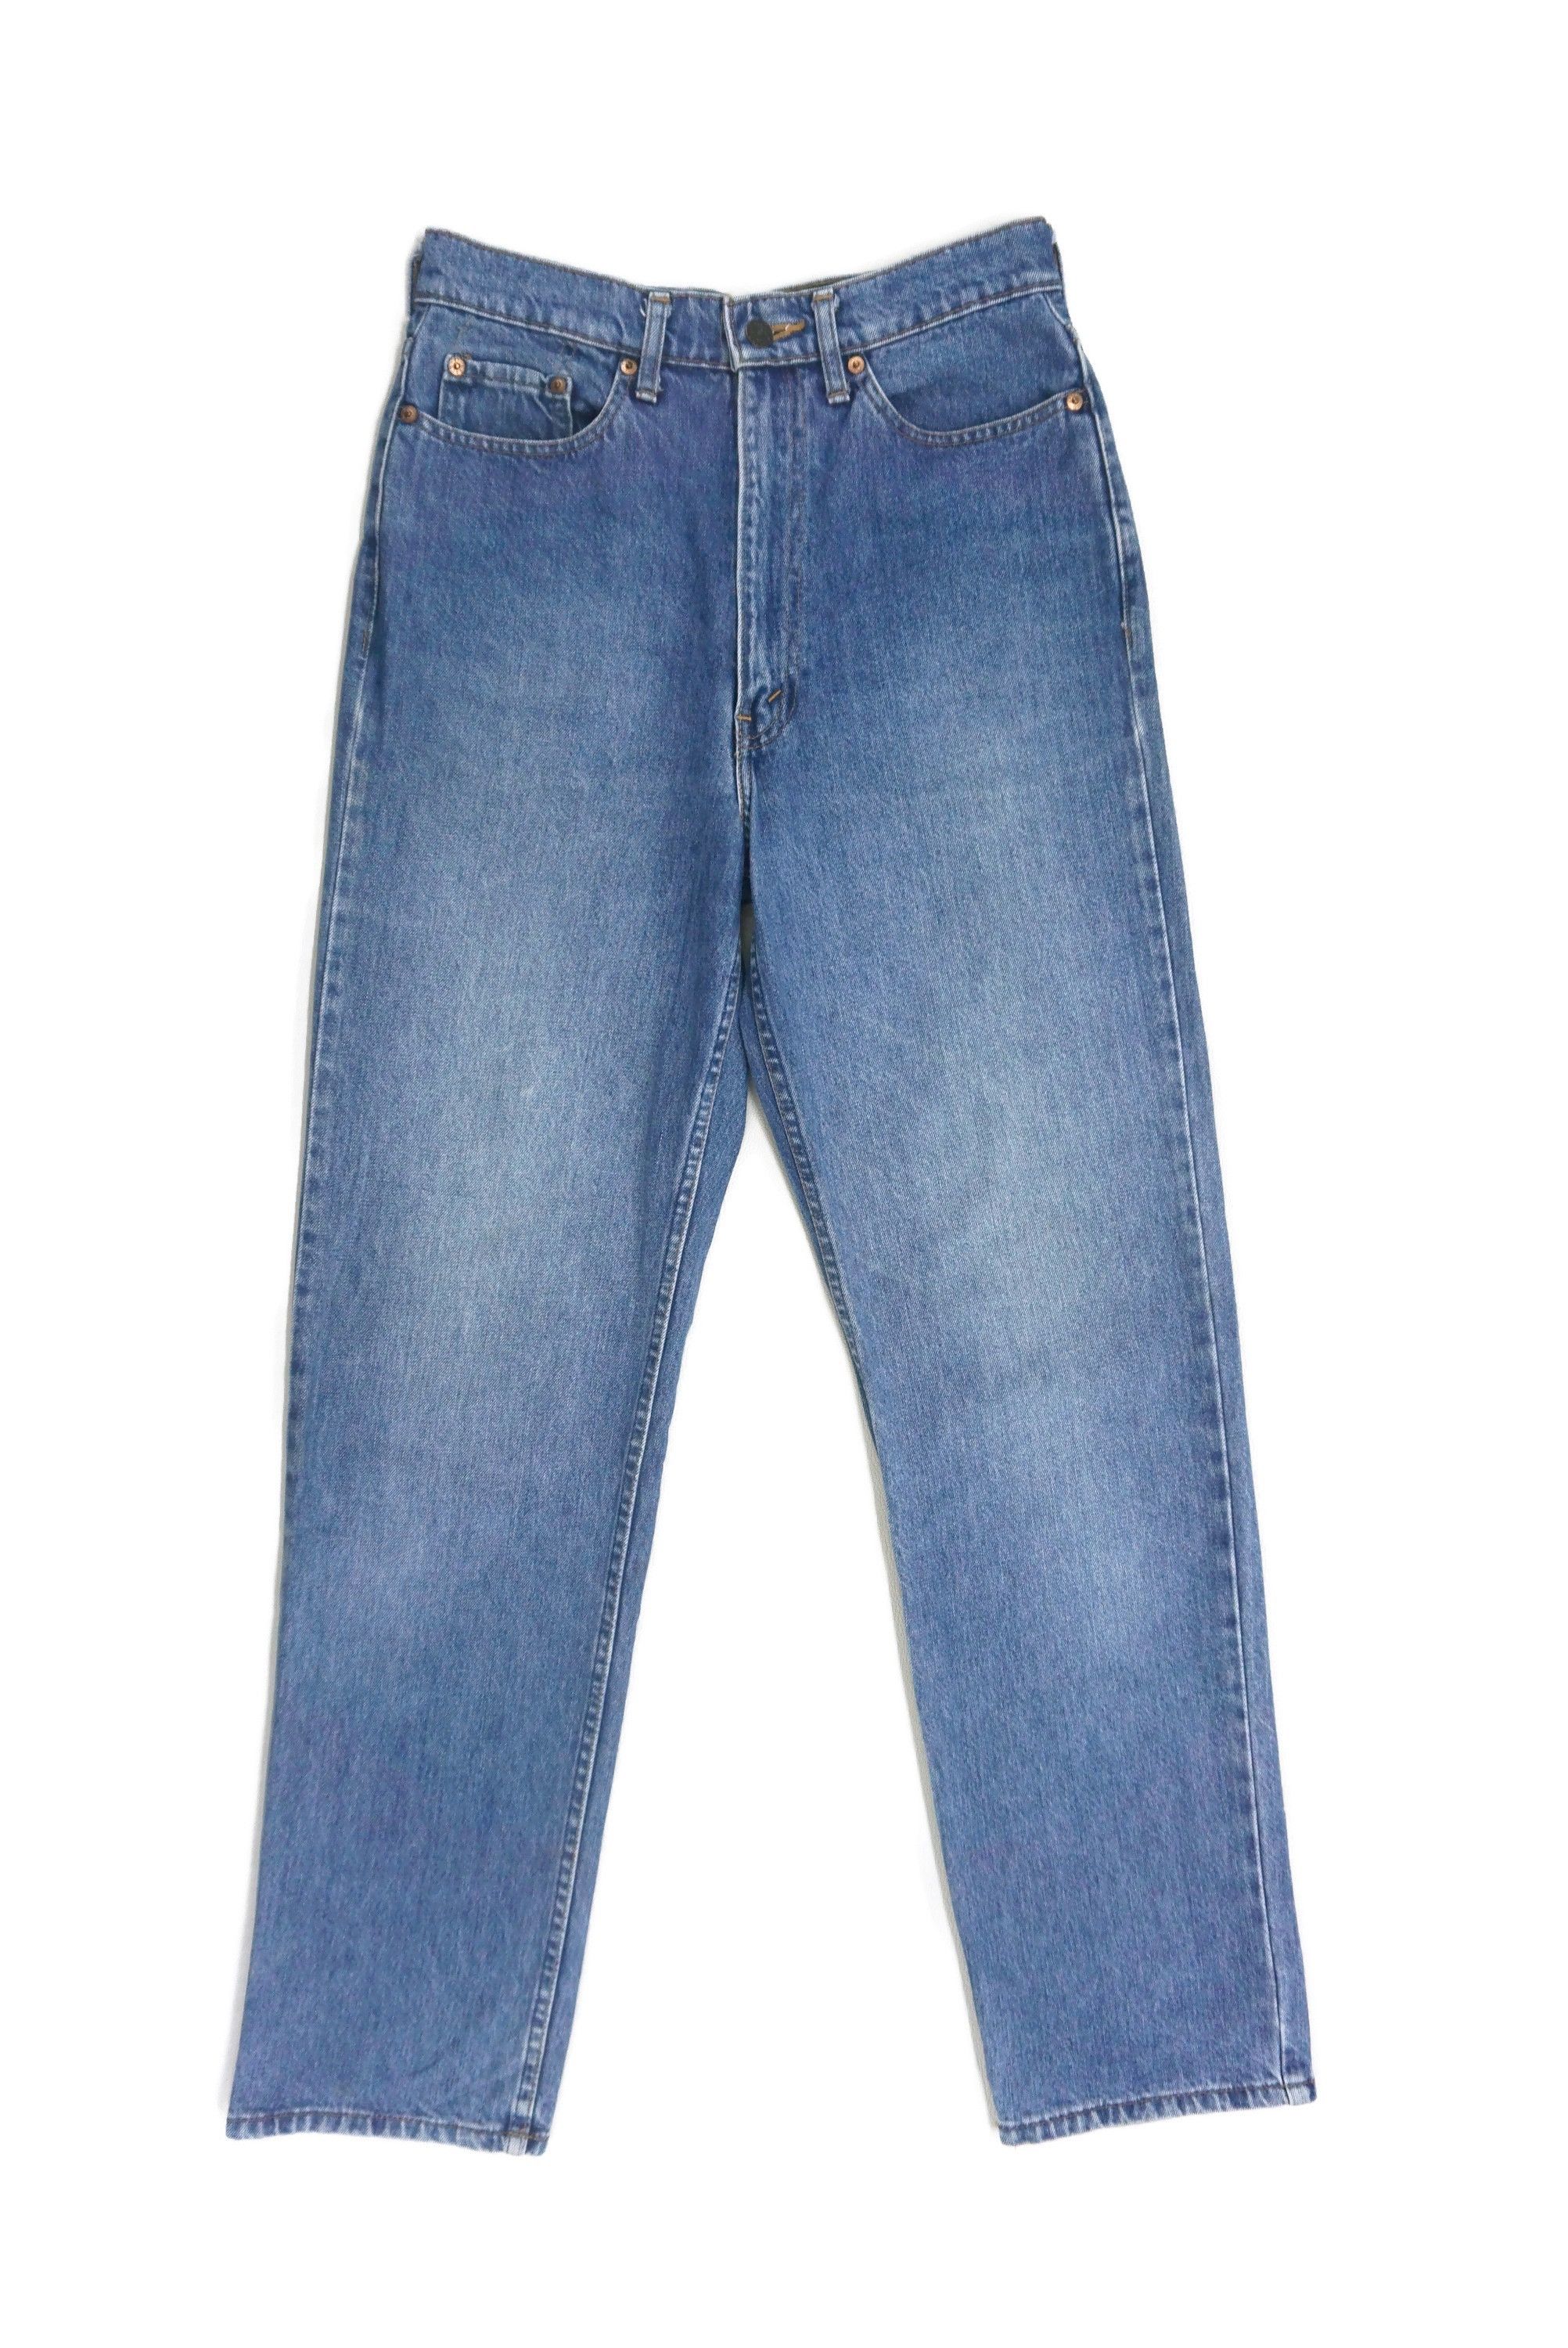 Levi's Made & Crafted Levis 509 Denim Honeycomb Vintage Jeans Made in ...